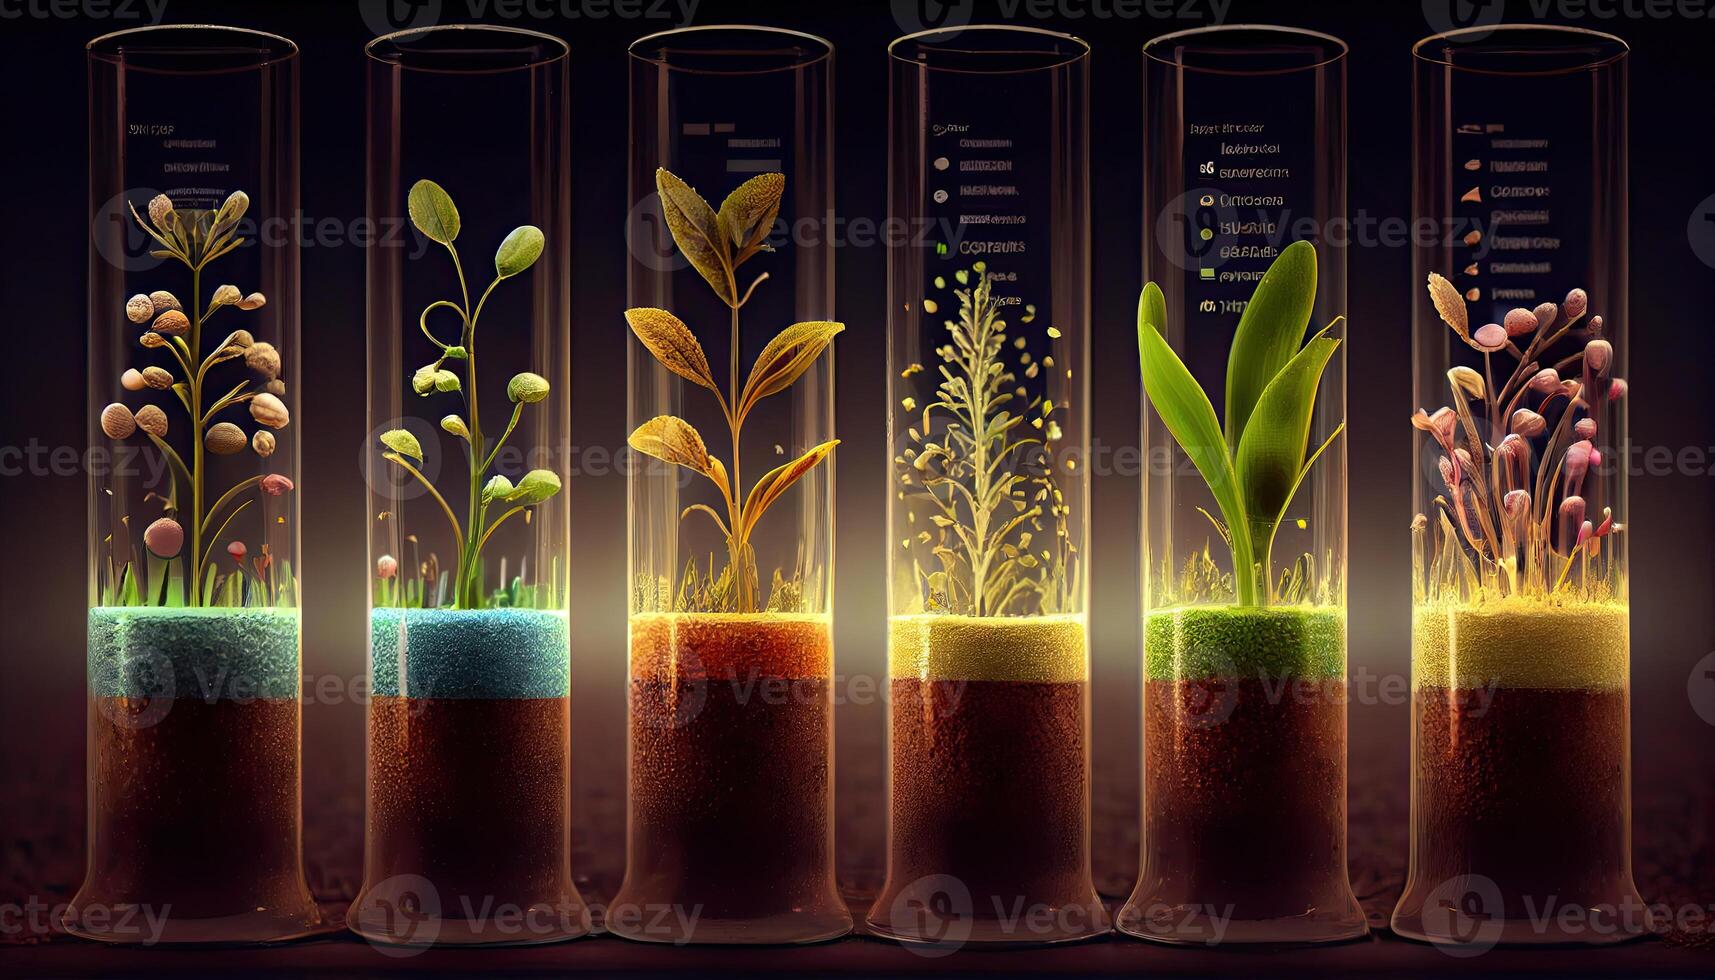 Plant seeds in test tubes for genetics research. Laboratory Analysis of Agricultural Commodities photo